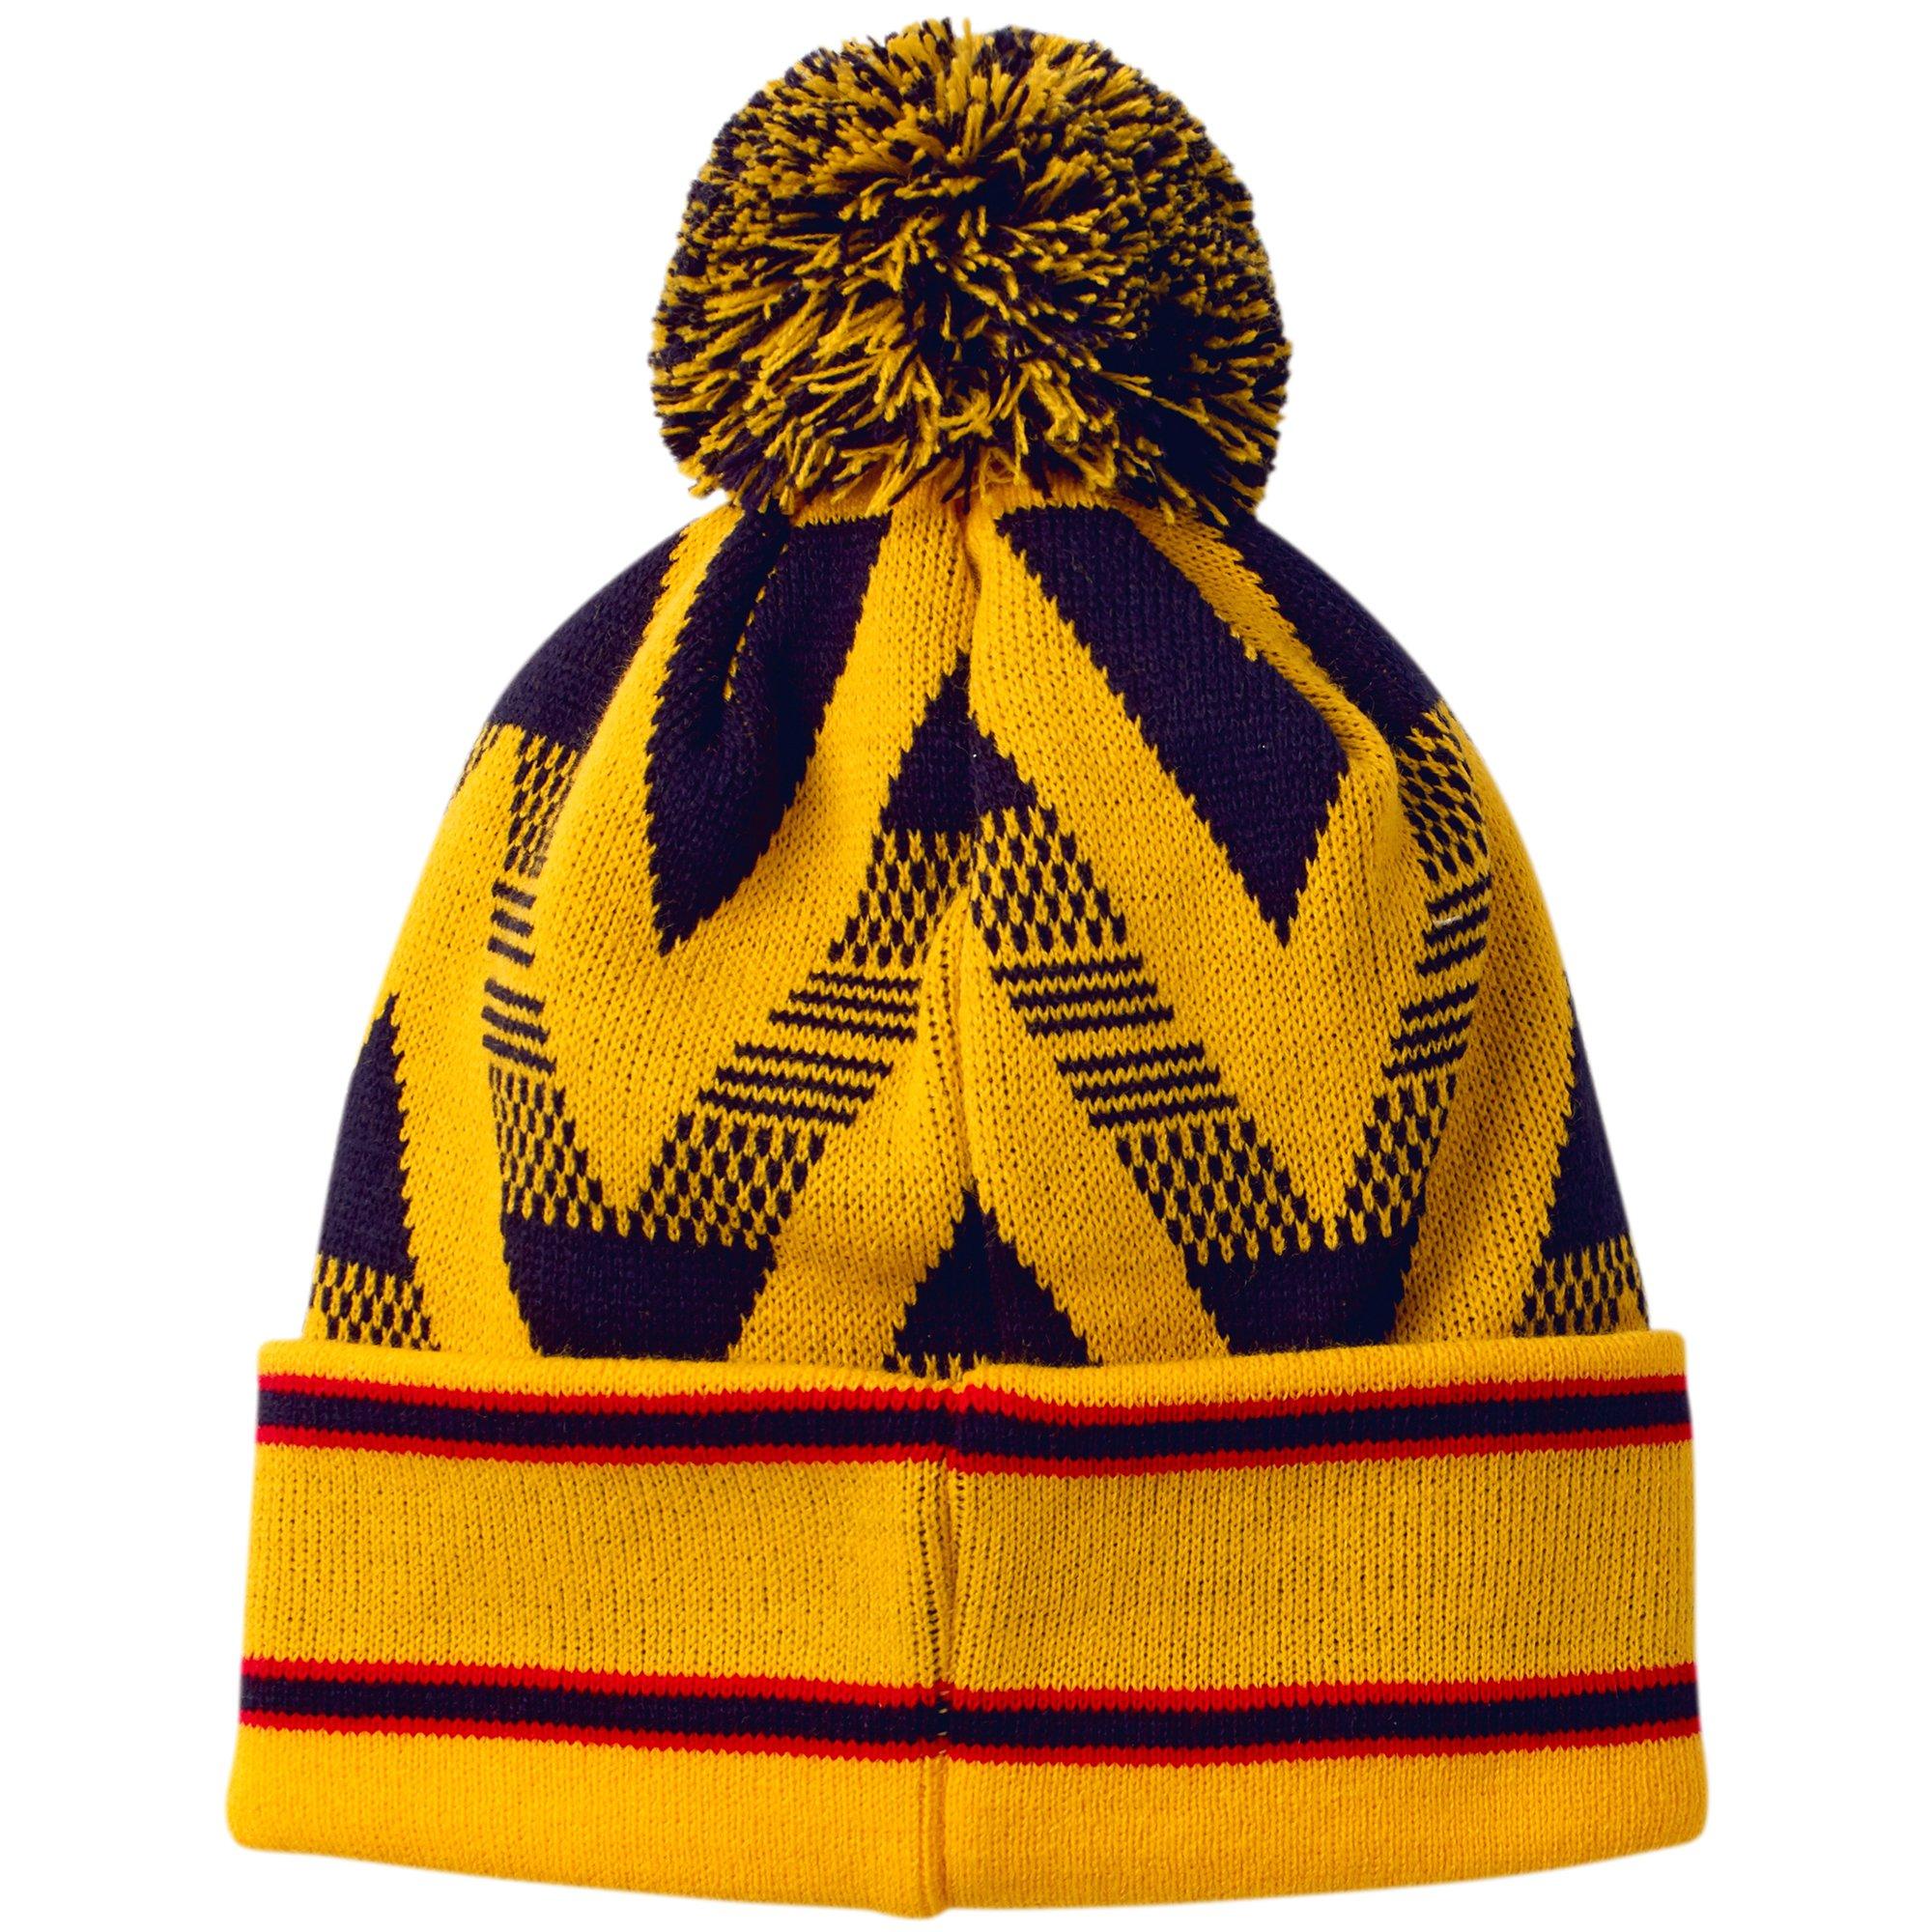 Arsenal Bruised Banana Beanie | Official Online Store